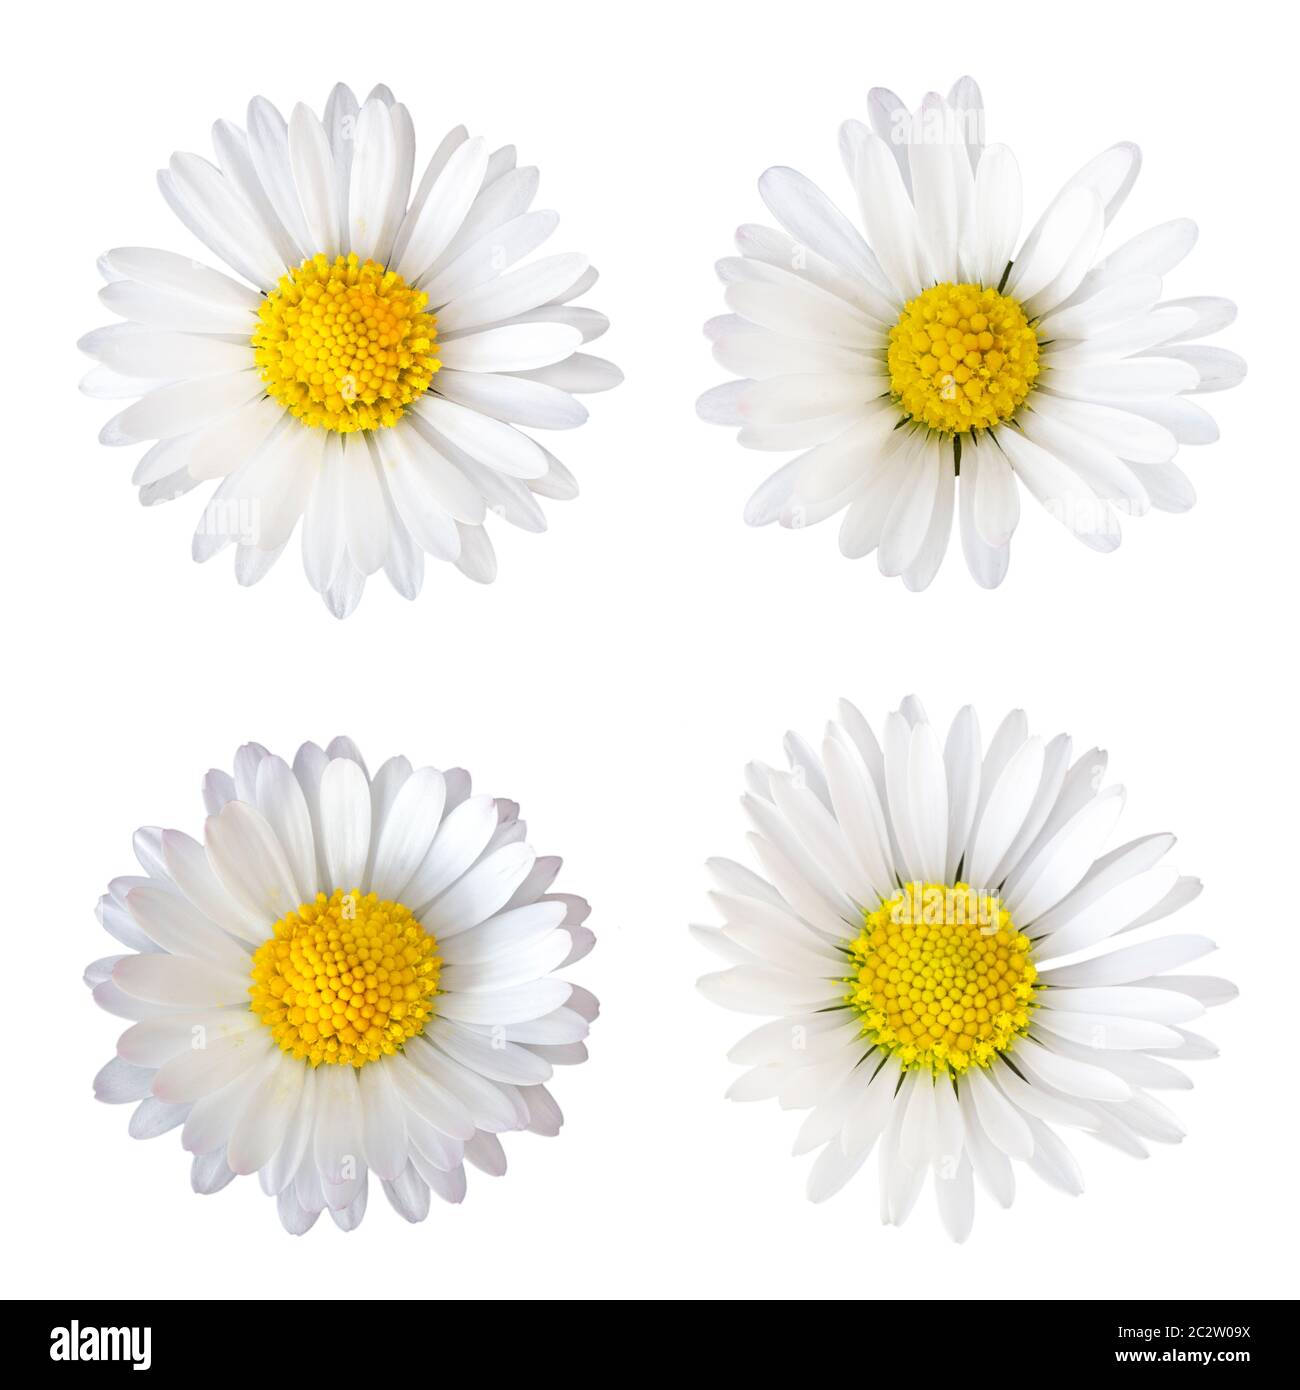 Four daisy flowers (Bellis perennis) isolated on white background Stock Photo